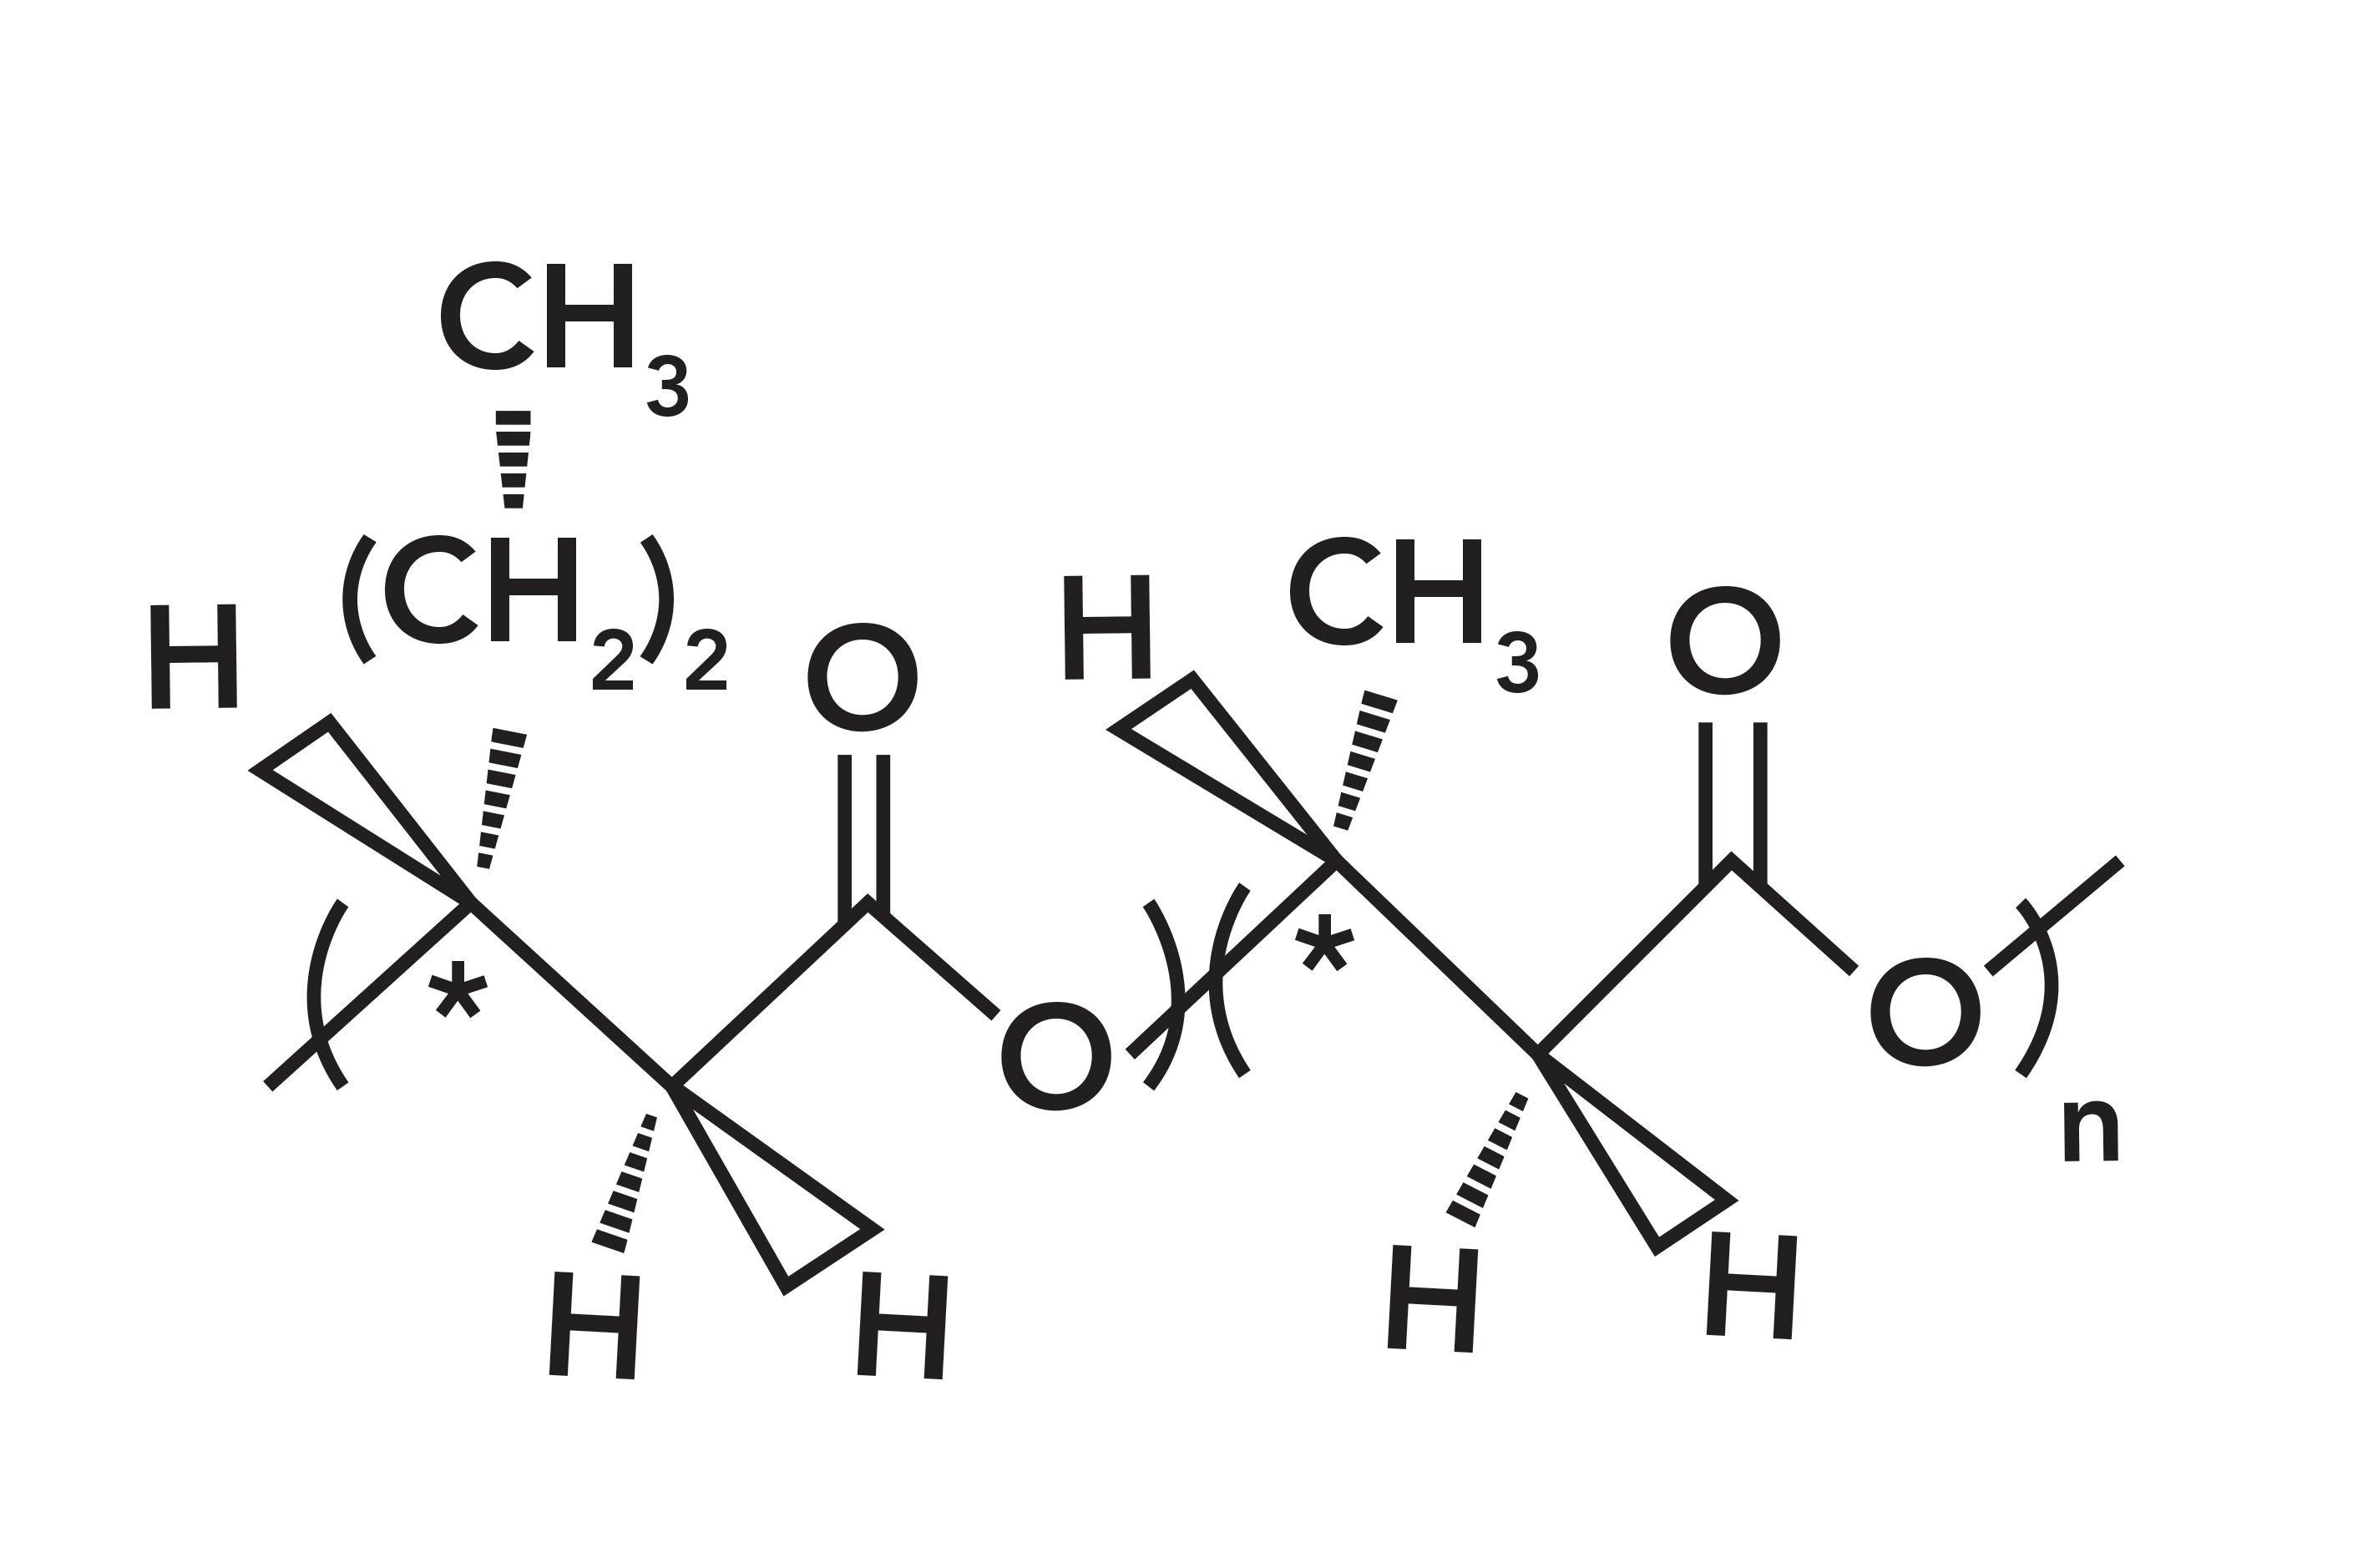 FIGURE 1: Structure of Nodax. The polymeric unit on the right (in parentheses) is polyhydroxybutanate (PHB), while the monomer on the left (in parentheses) appears with the incorporation of hydroxyhexanoate in the chain.